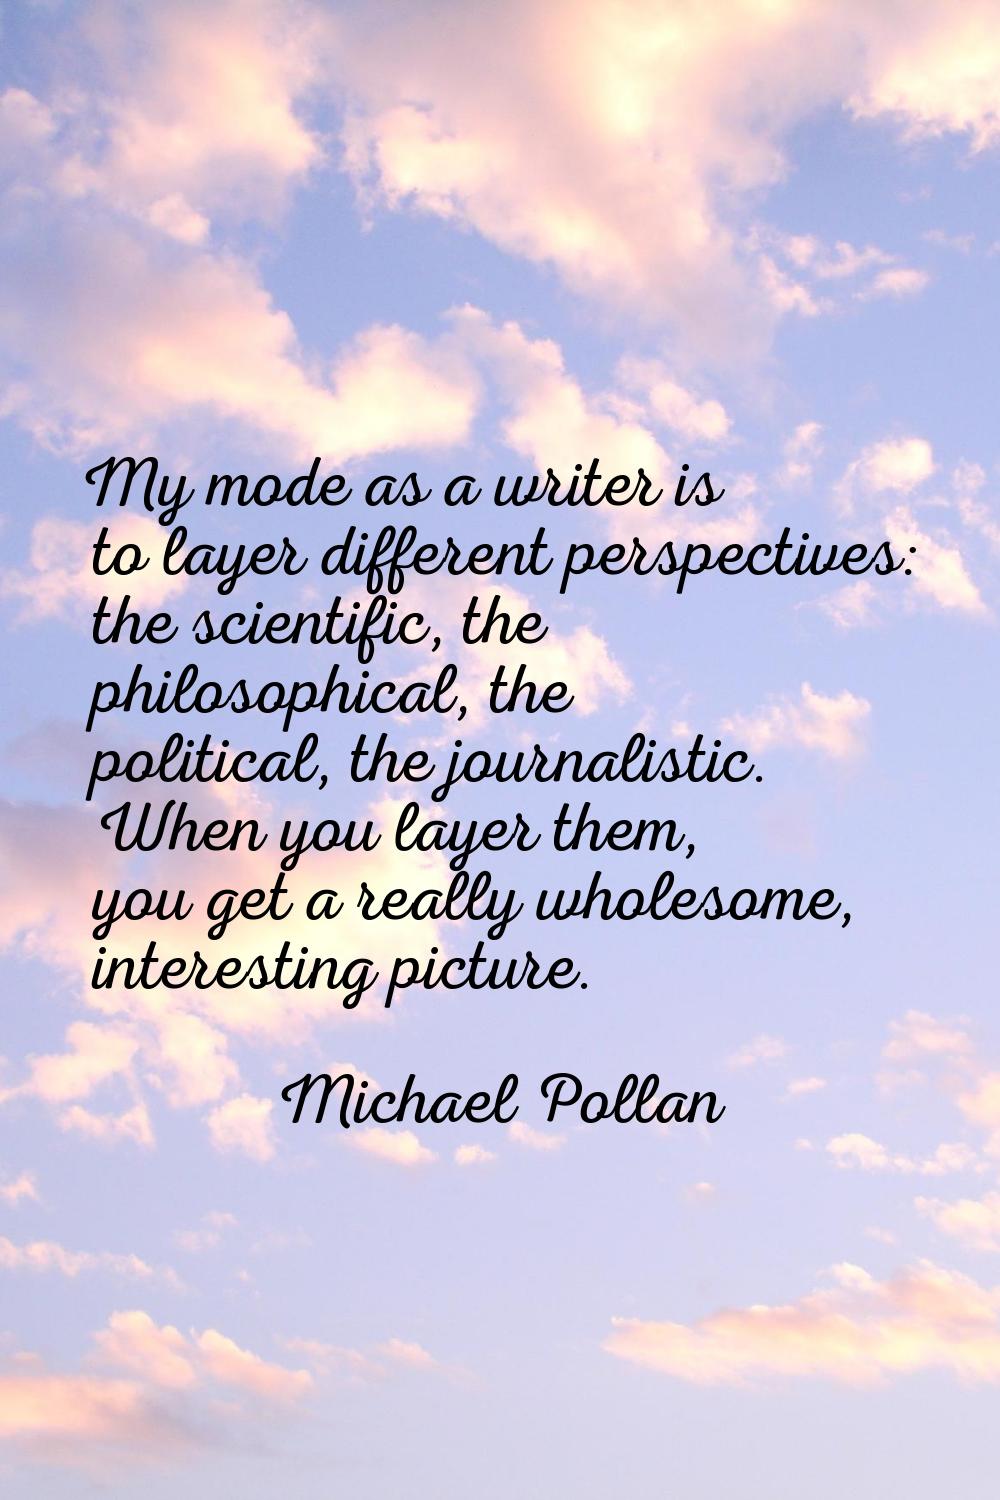 My mode as a writer is to layer different perspectives: the scientific, the philosophical, the poli